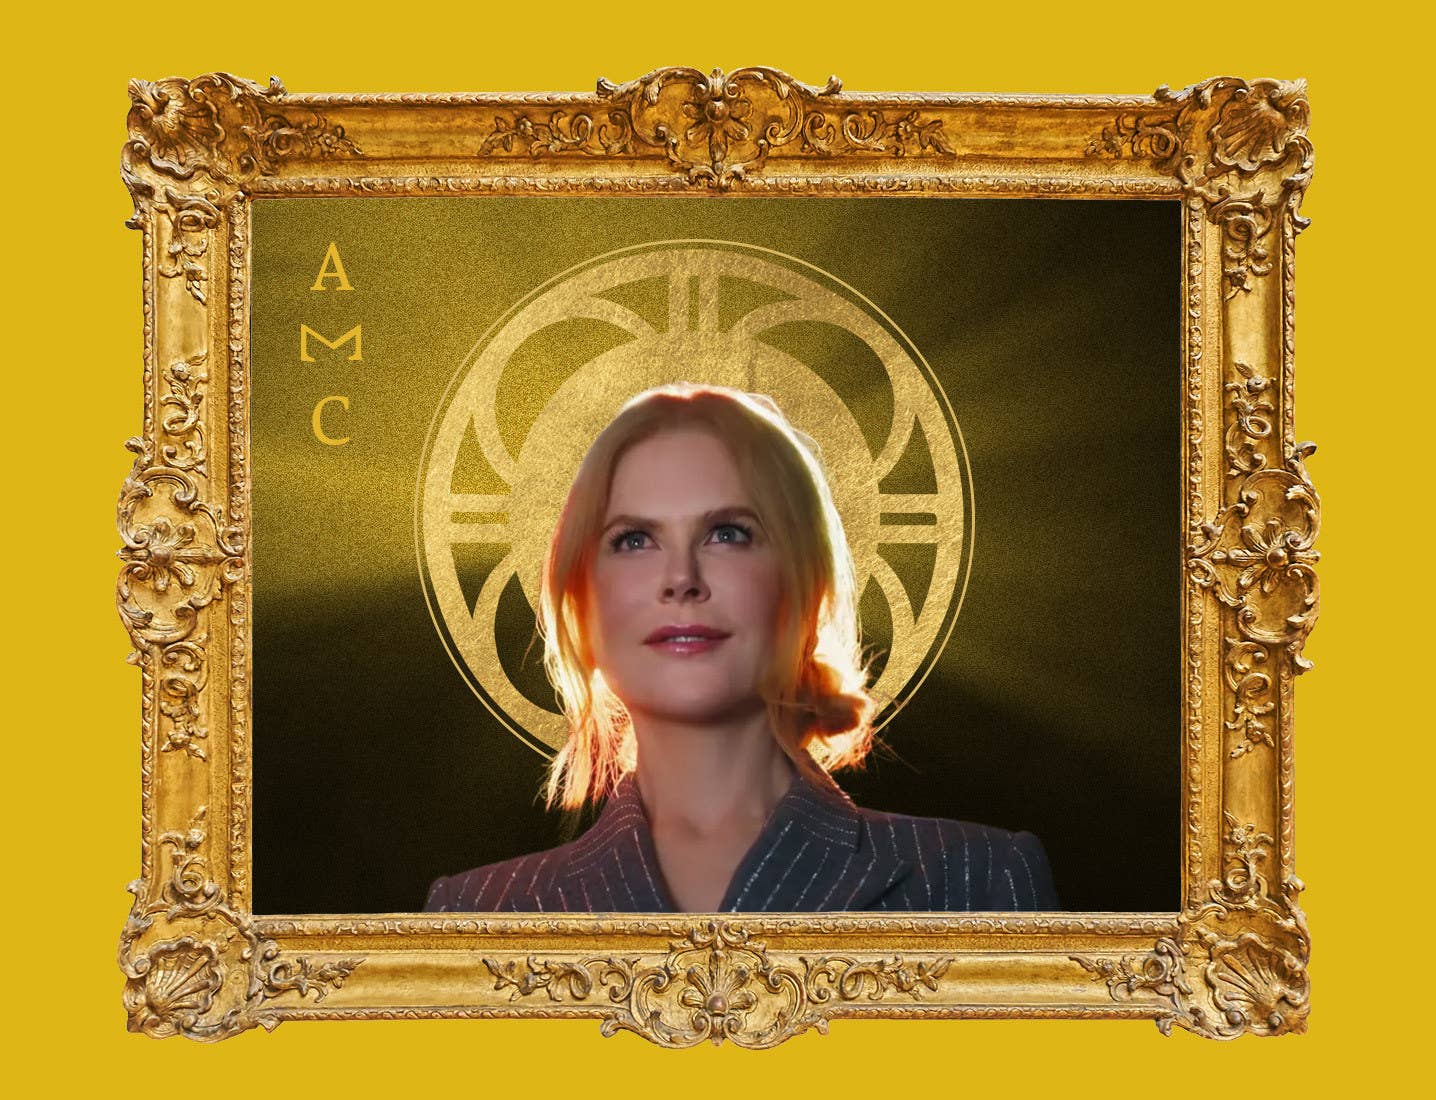 Nicole Kidman is shown with a brilliant ray of light behind her head as she stares offscreen. The image from the AMC ad has been re-stylized to resemble a Renaissance deity and is seen in a gilded frame.